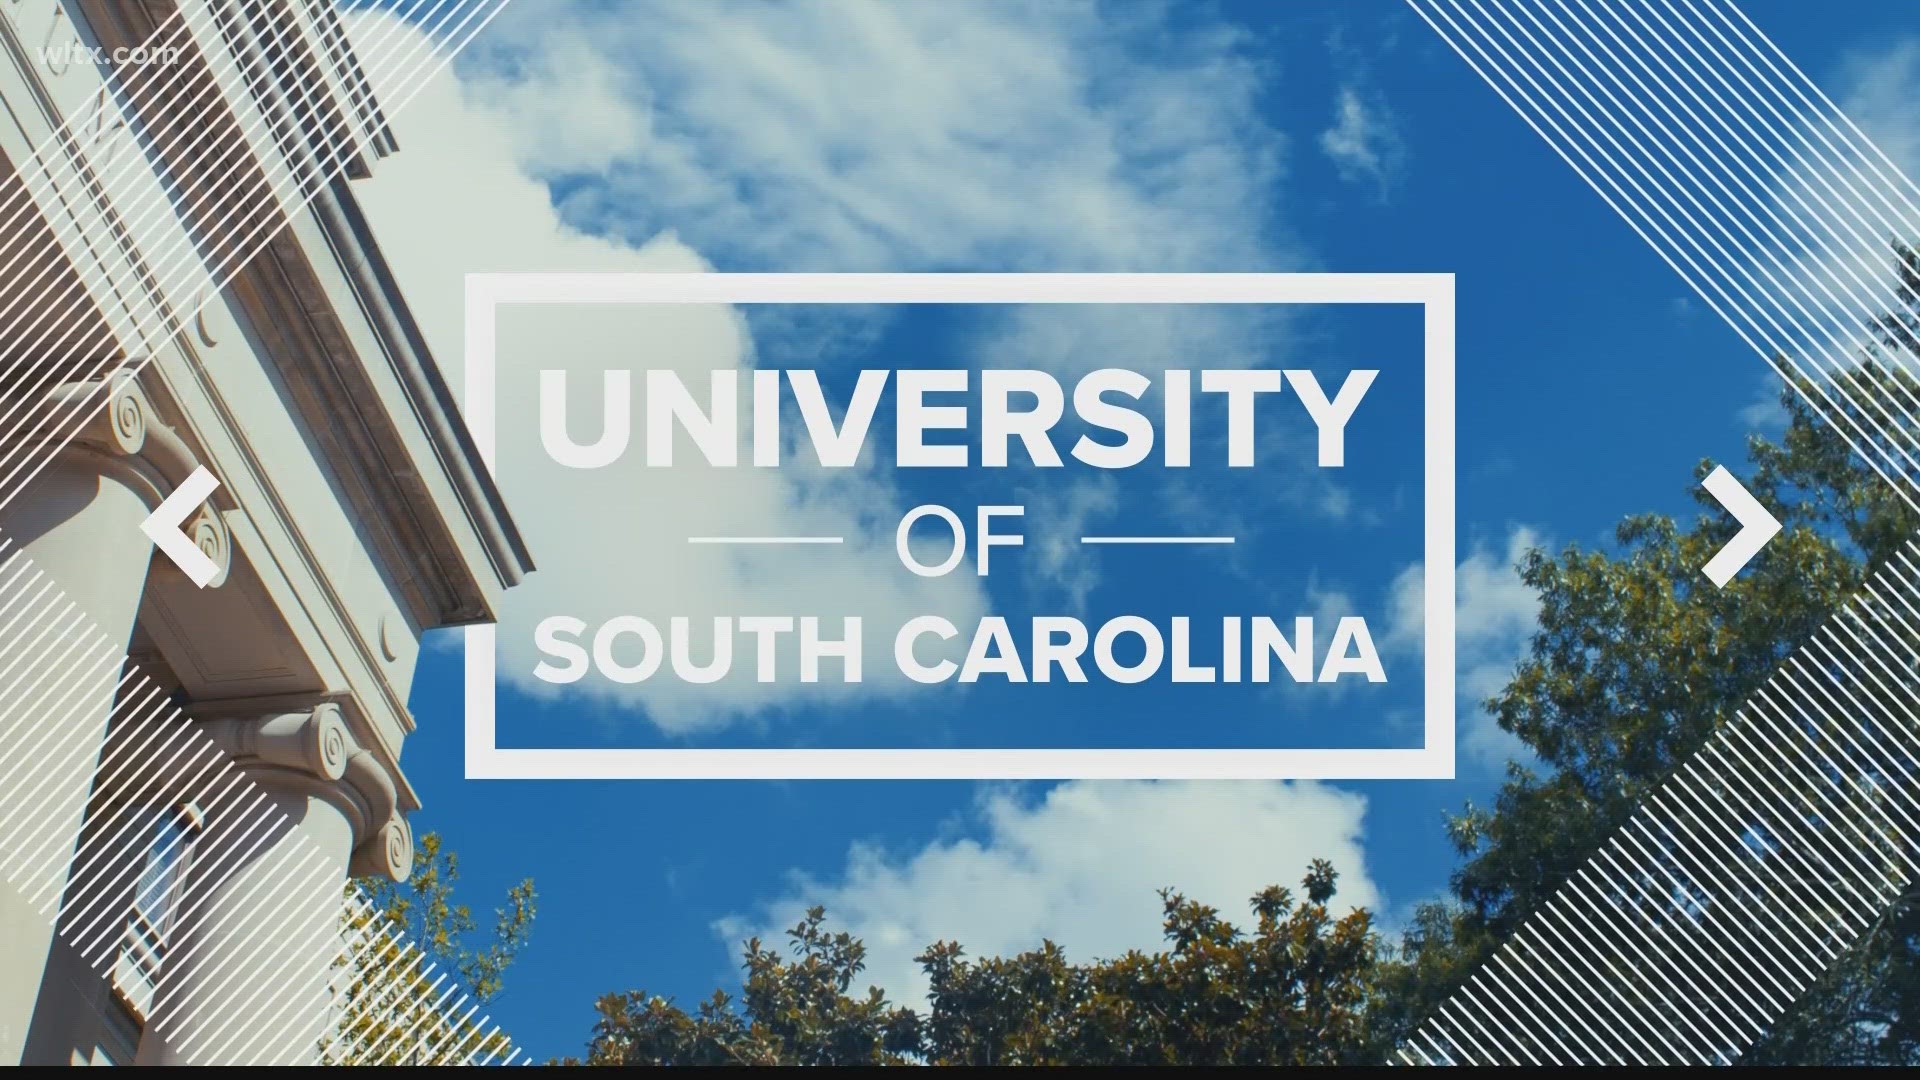 South Carolina residents wishing to attend the University of South Carolina may qualify for free tuition and coverage of academic fees if they meet certain criteria.